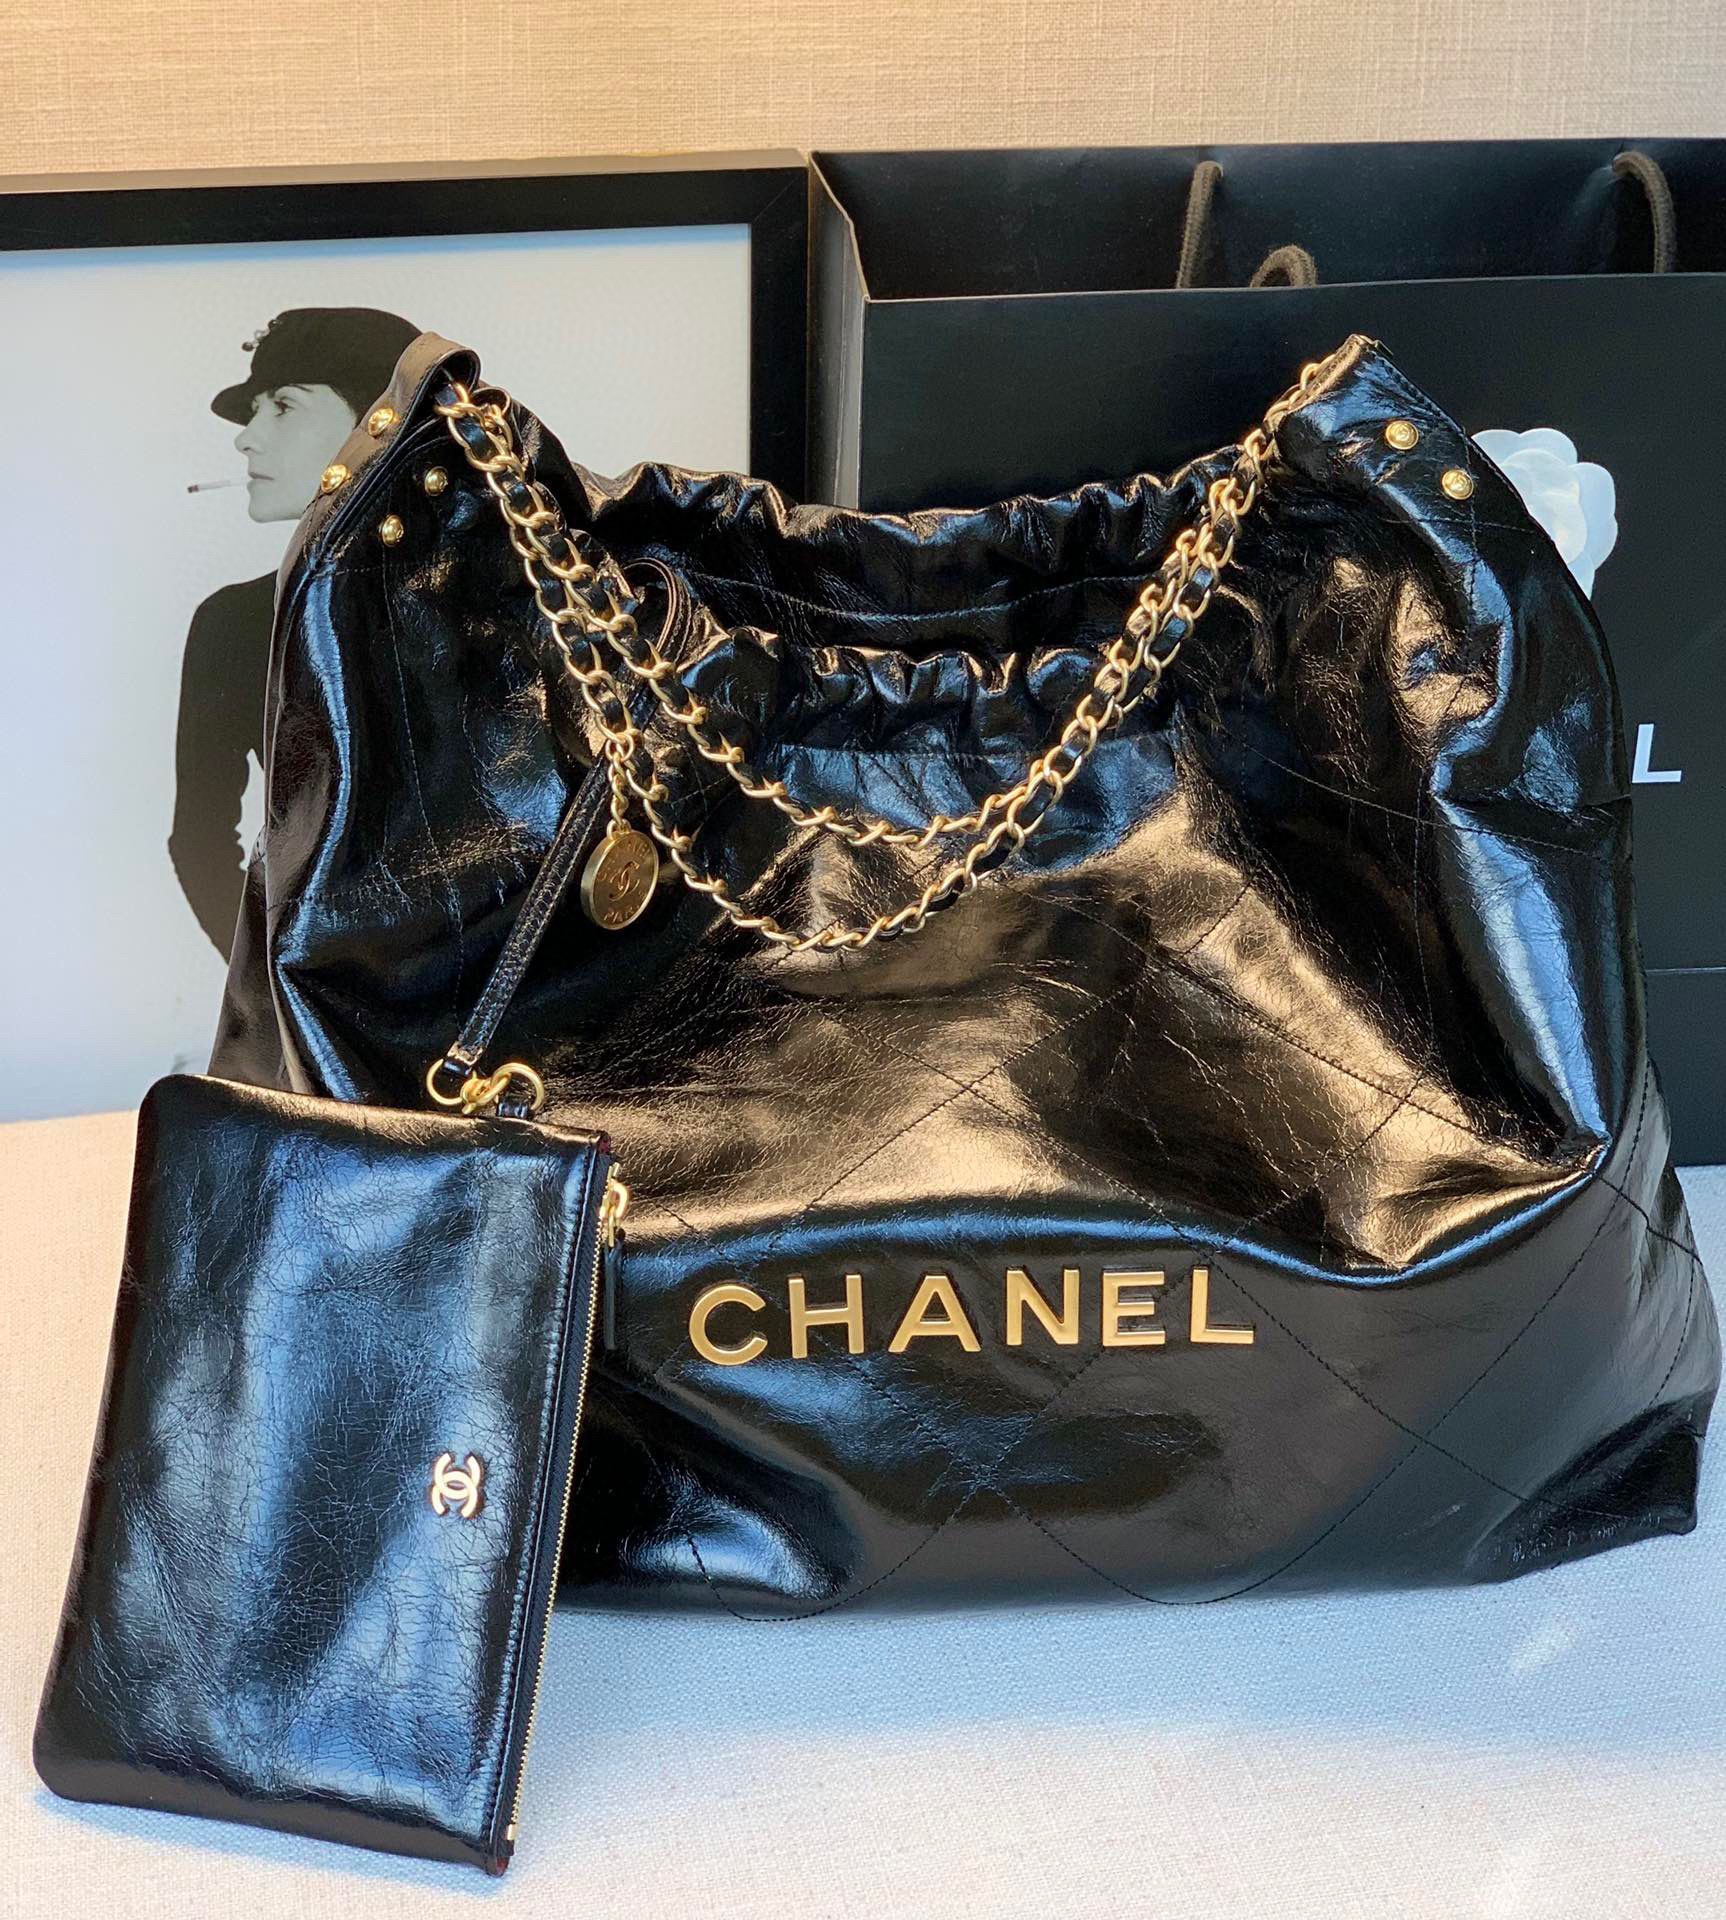 Chanel Original Oil Wax Leather Calfskin Cable Shopping Bag A67088 Black